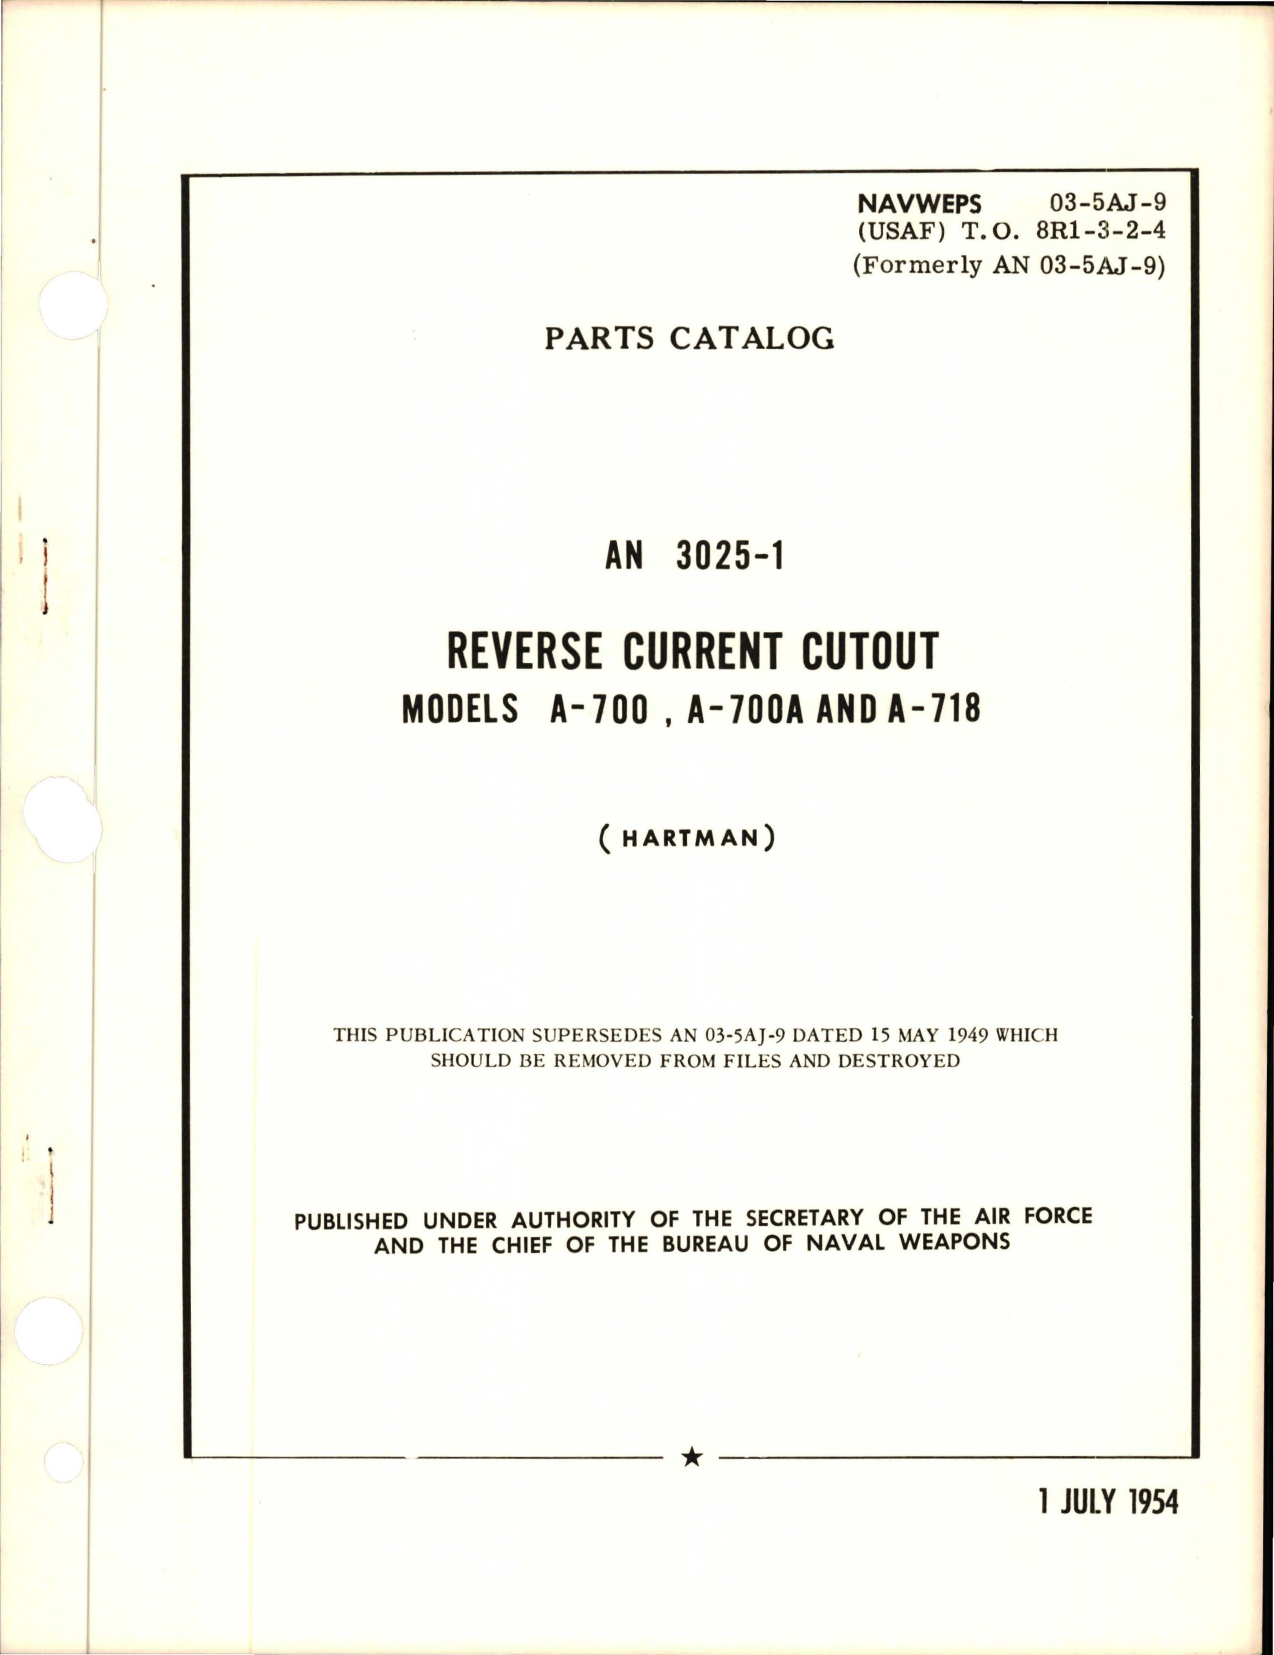 Sample page 1 from AirCorps Library document: Parts Catalog for Reverse Current Cutout - AN 3025-1 - Models A-700, A-700A, and A-718 